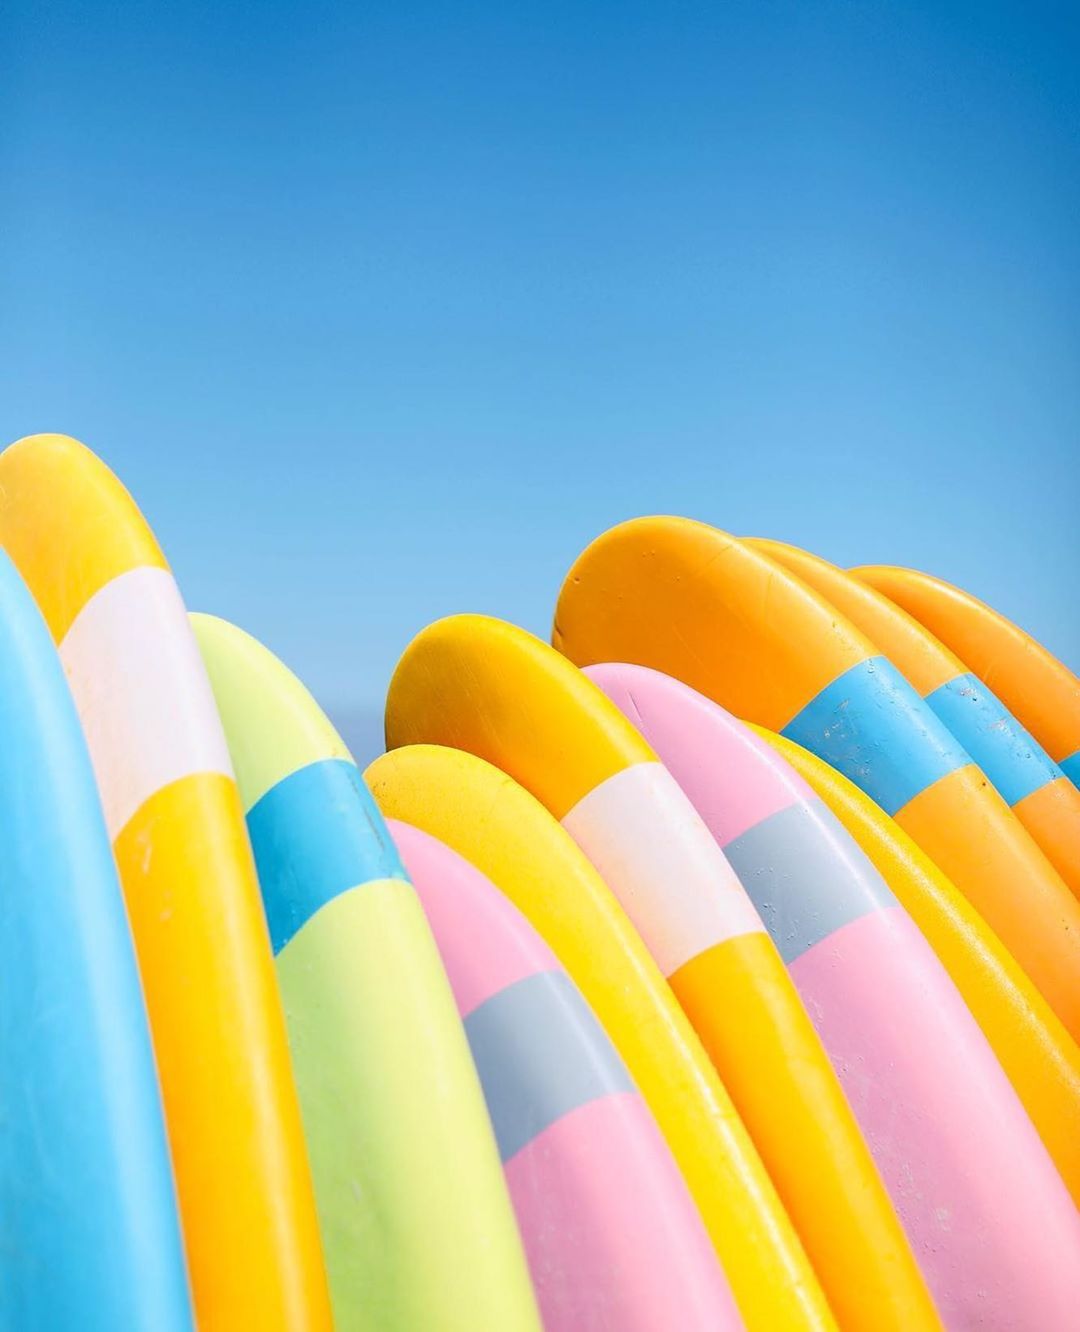 Brightly colored surfboards against a bright blue sky.